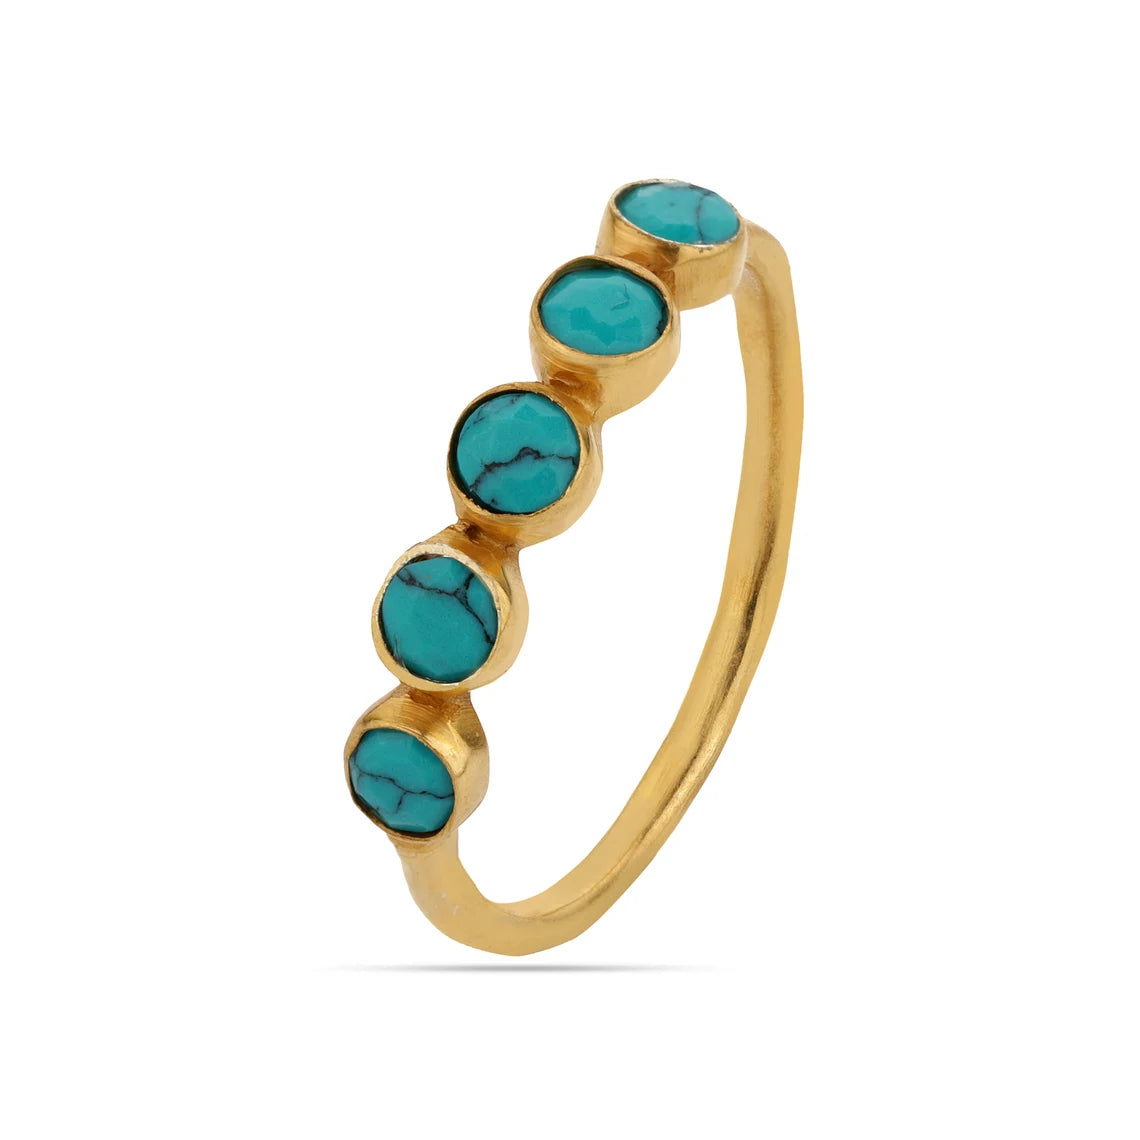 Turquoise Eternity Band Ring - December Birthstone - Half Eternity Ring - Round Turquoise Ring - Bezel Ring - Delicate Ring